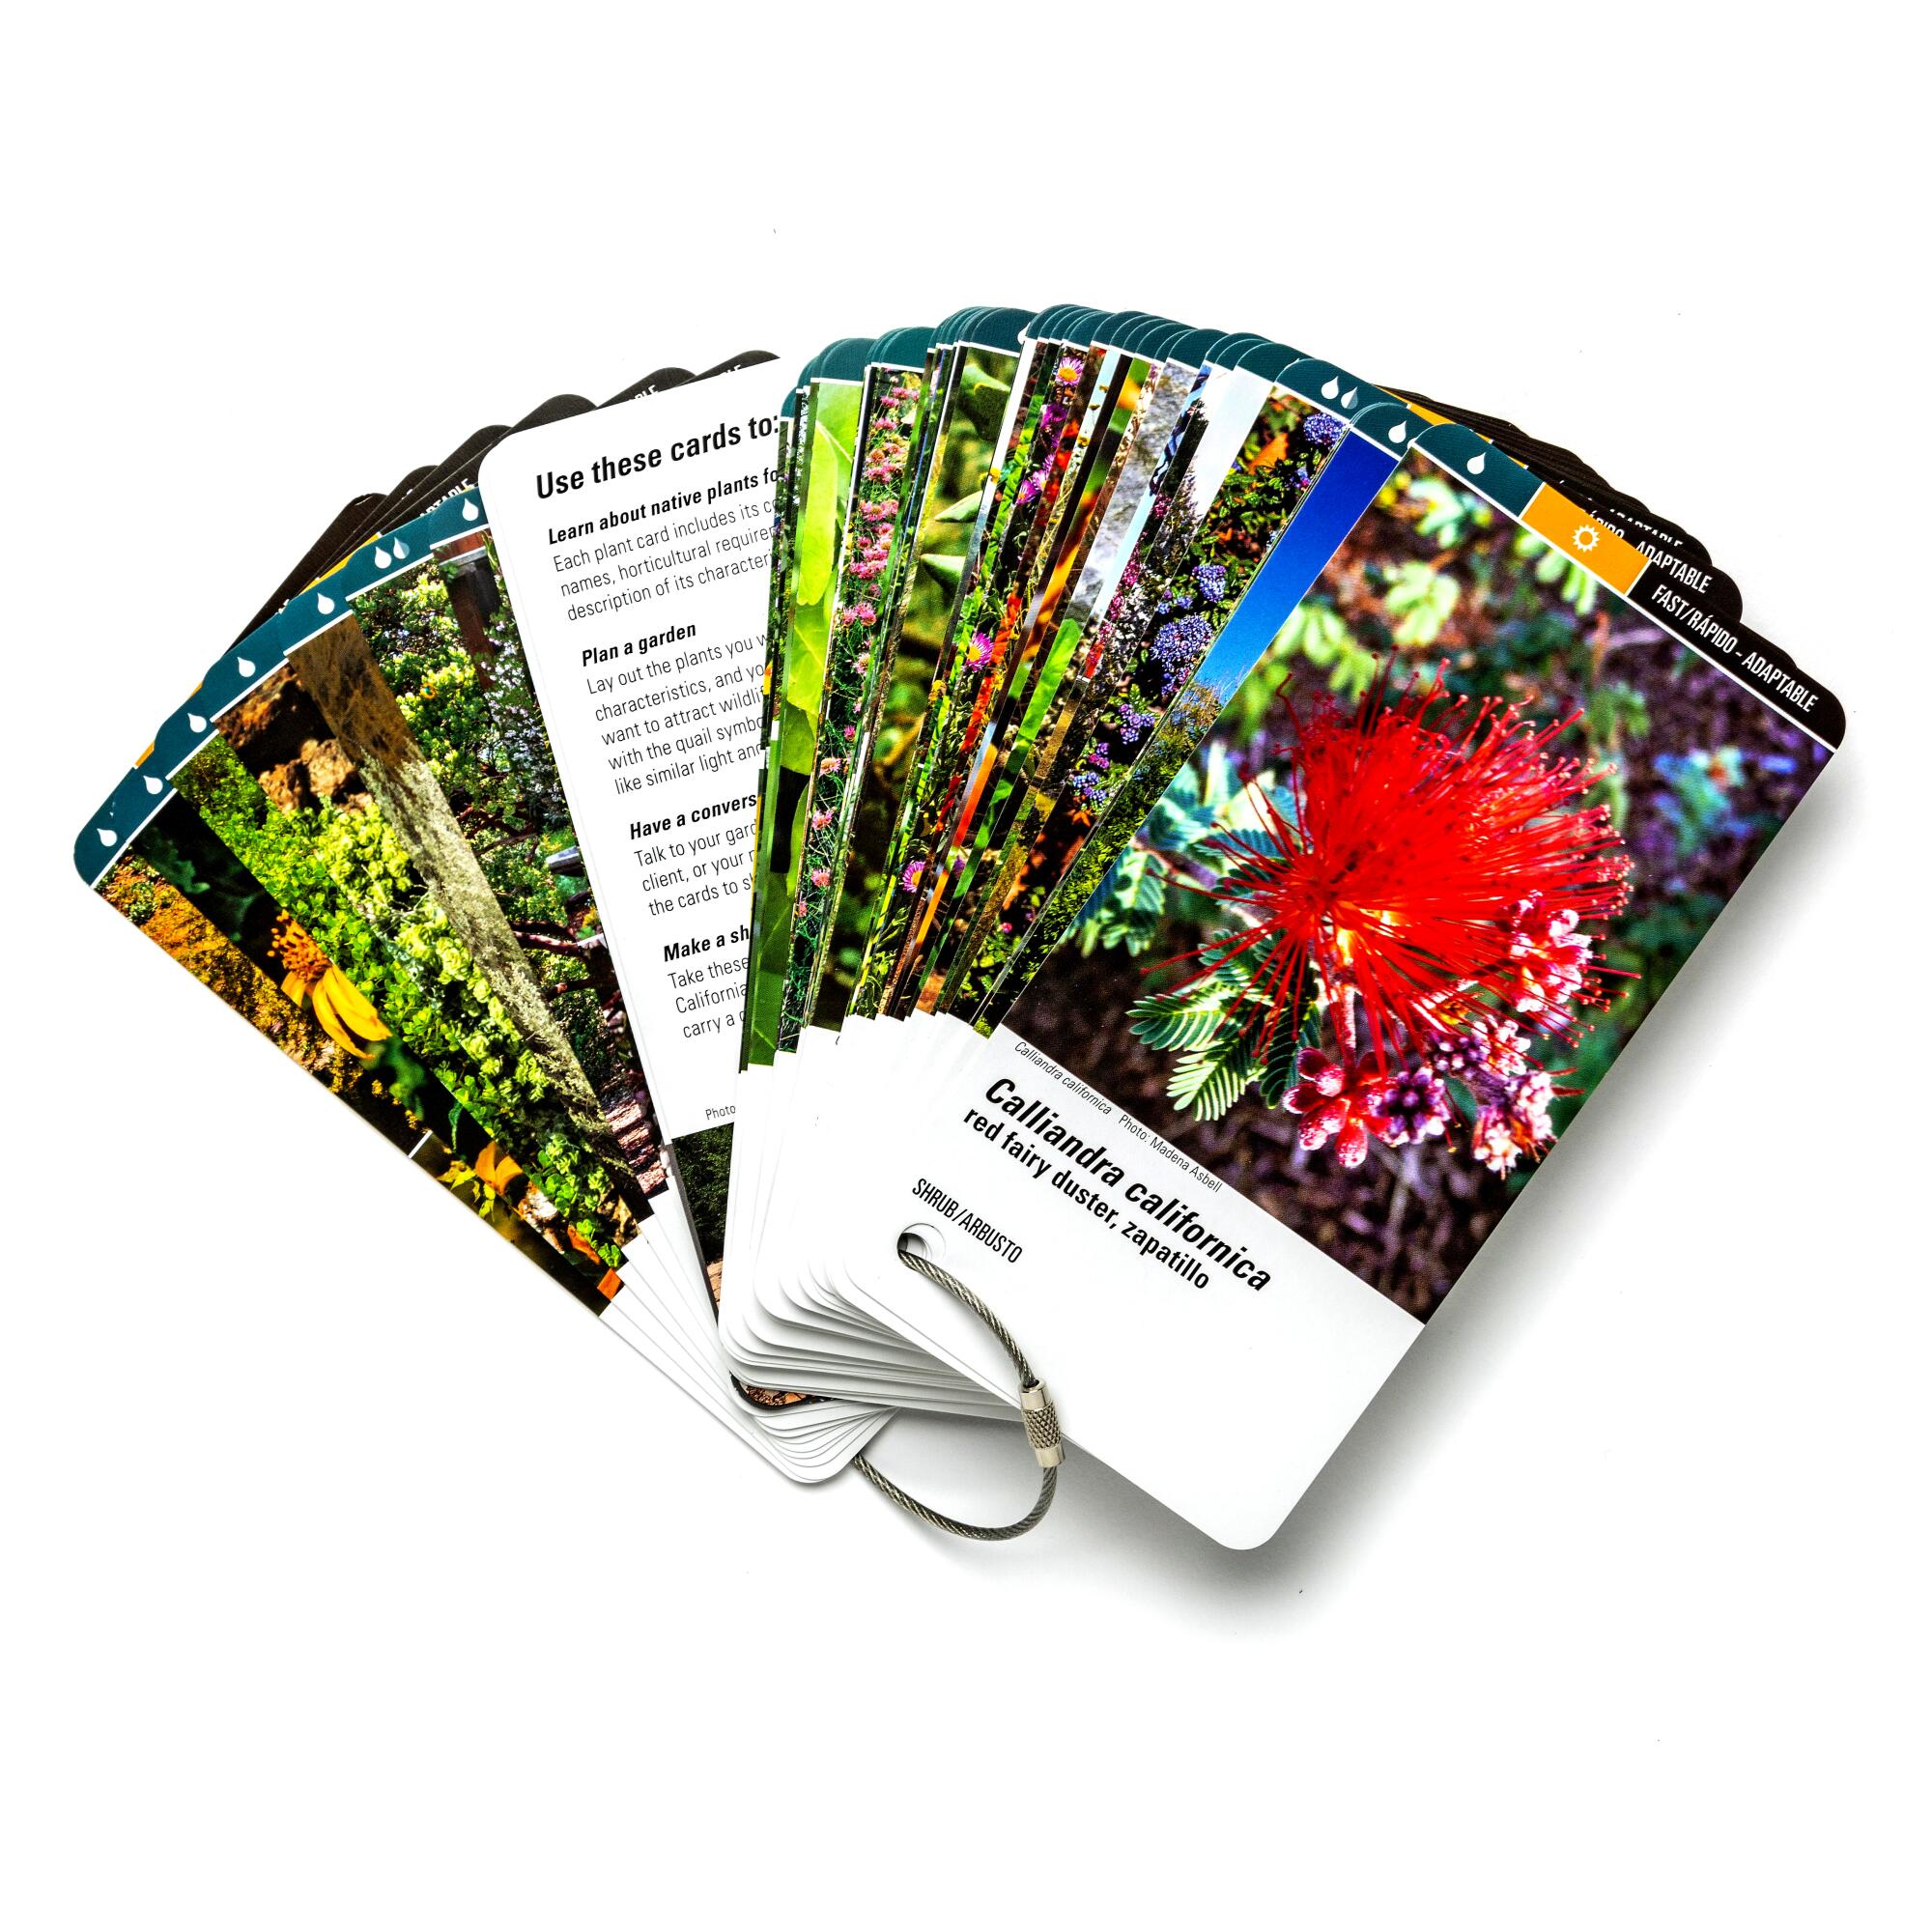 The Theodore Payne Foundation for Wild Flowers & Native Plants has created a clever set of flashcards.